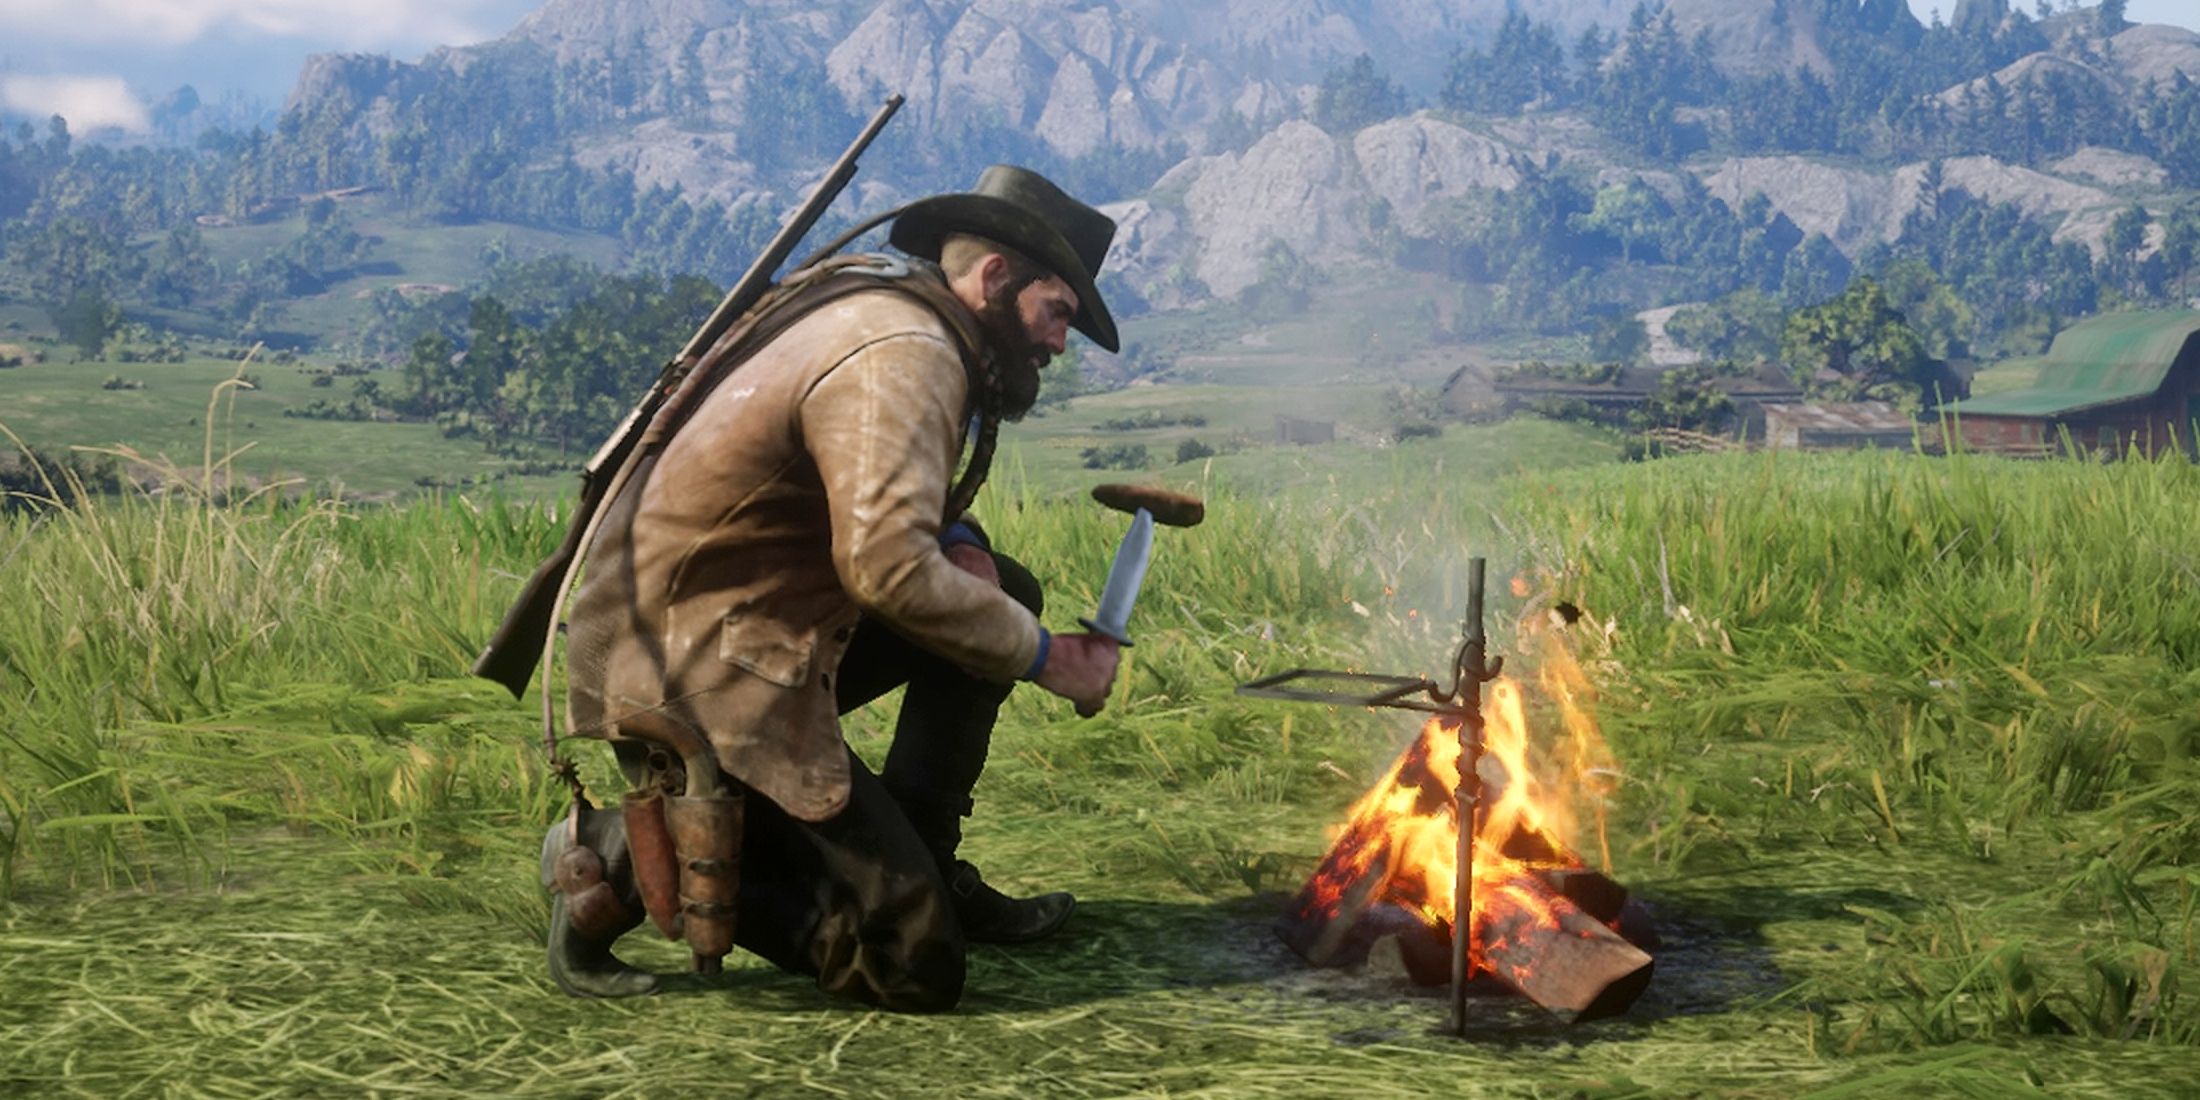 Arthur Cooking and Eating Meat at his Campsite in Red Dead Redemption 2